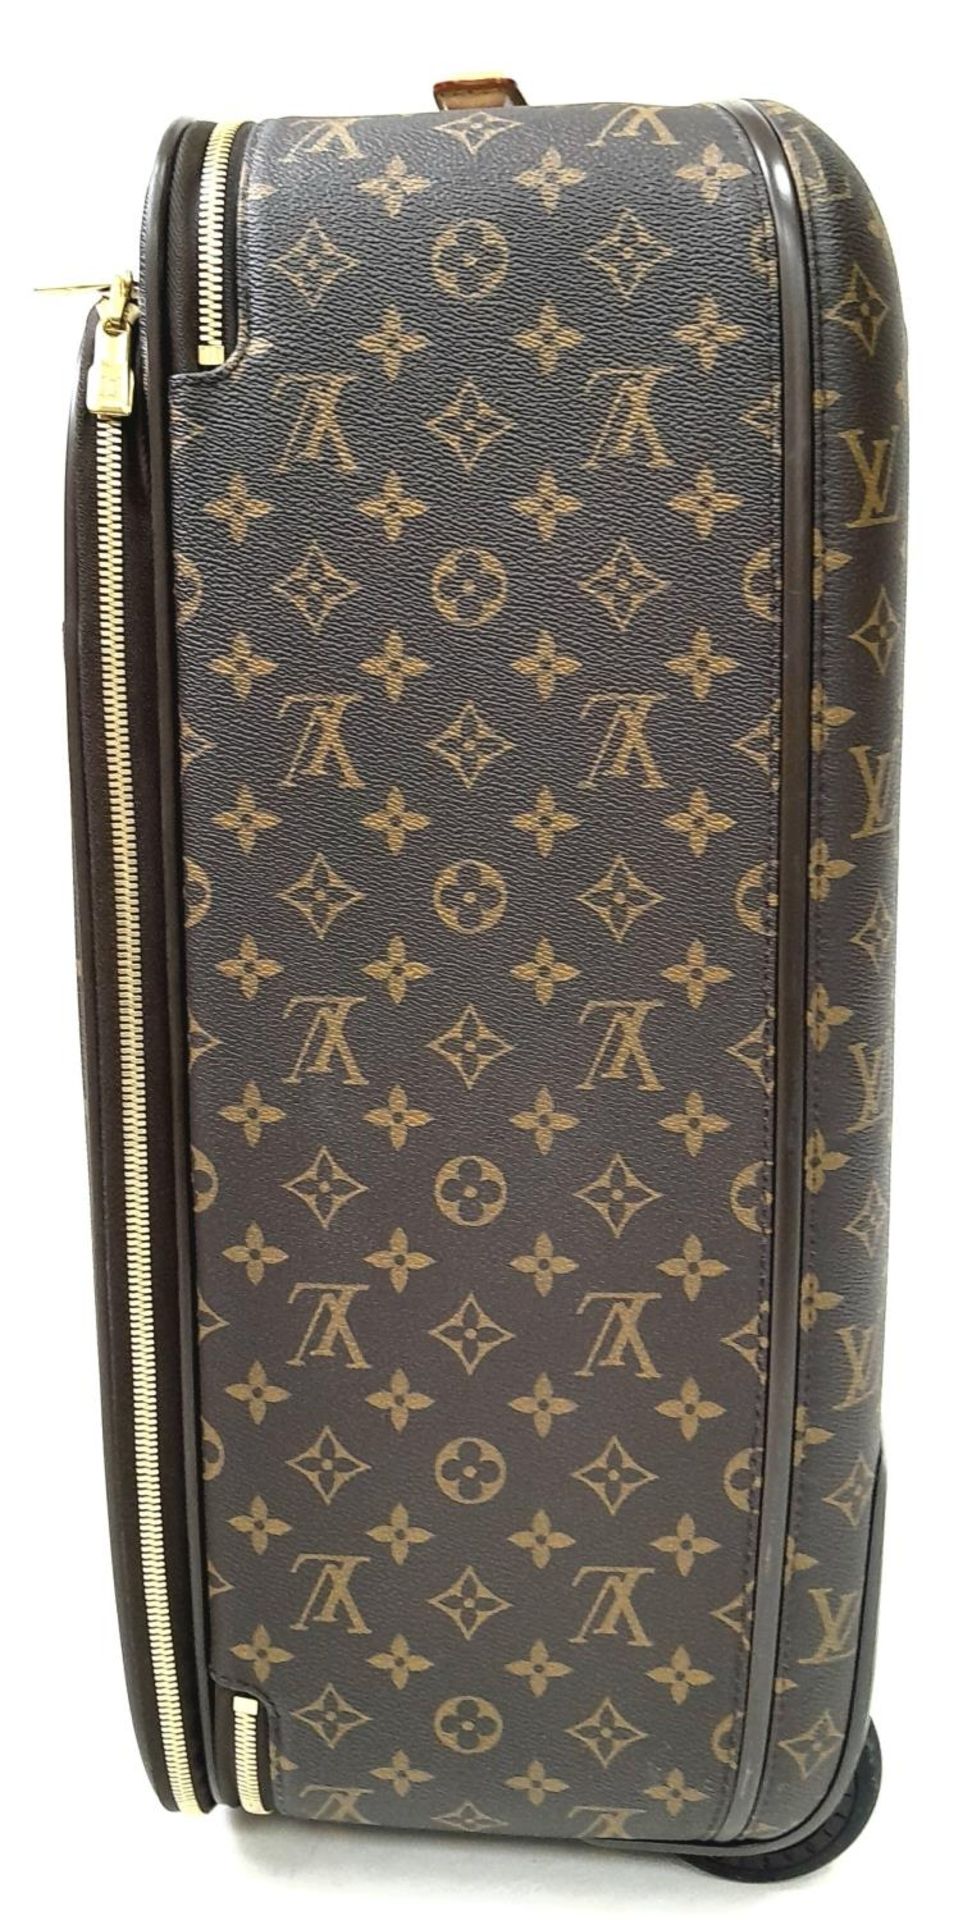 A Louis Vuitton Monogram Pegase Suitcase. Durable leather exterior with gold-toned hardware. Front - Image 2 of 16